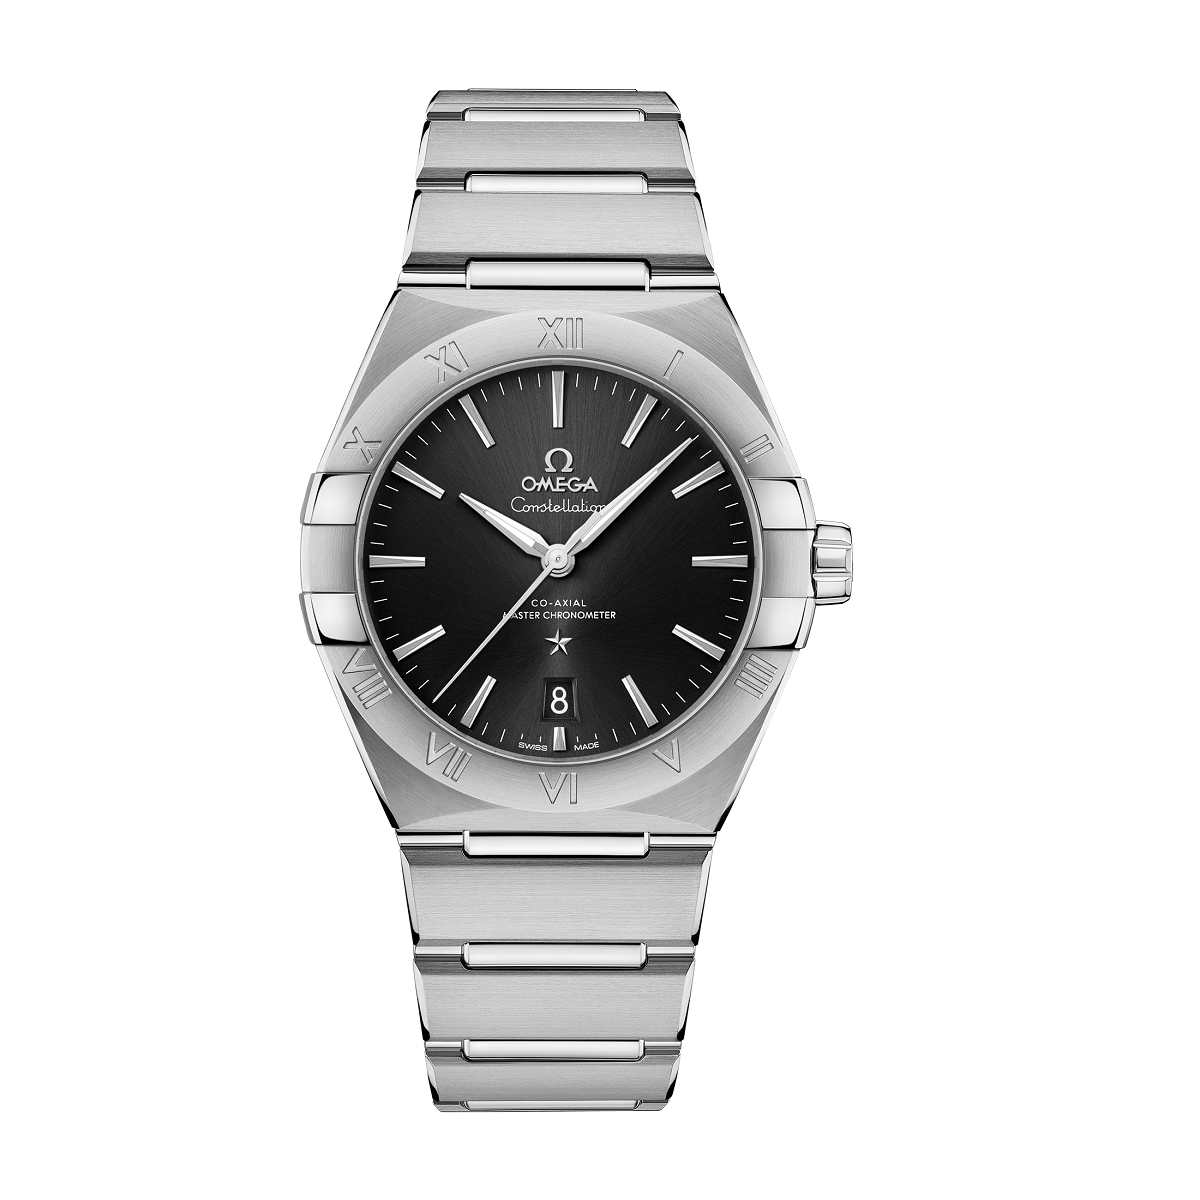 OMEGA CONSTELLATION OMEGA CO‑AXIAL MASTER CHRONOMETER 39 MM - 131.10.39.20.01.001